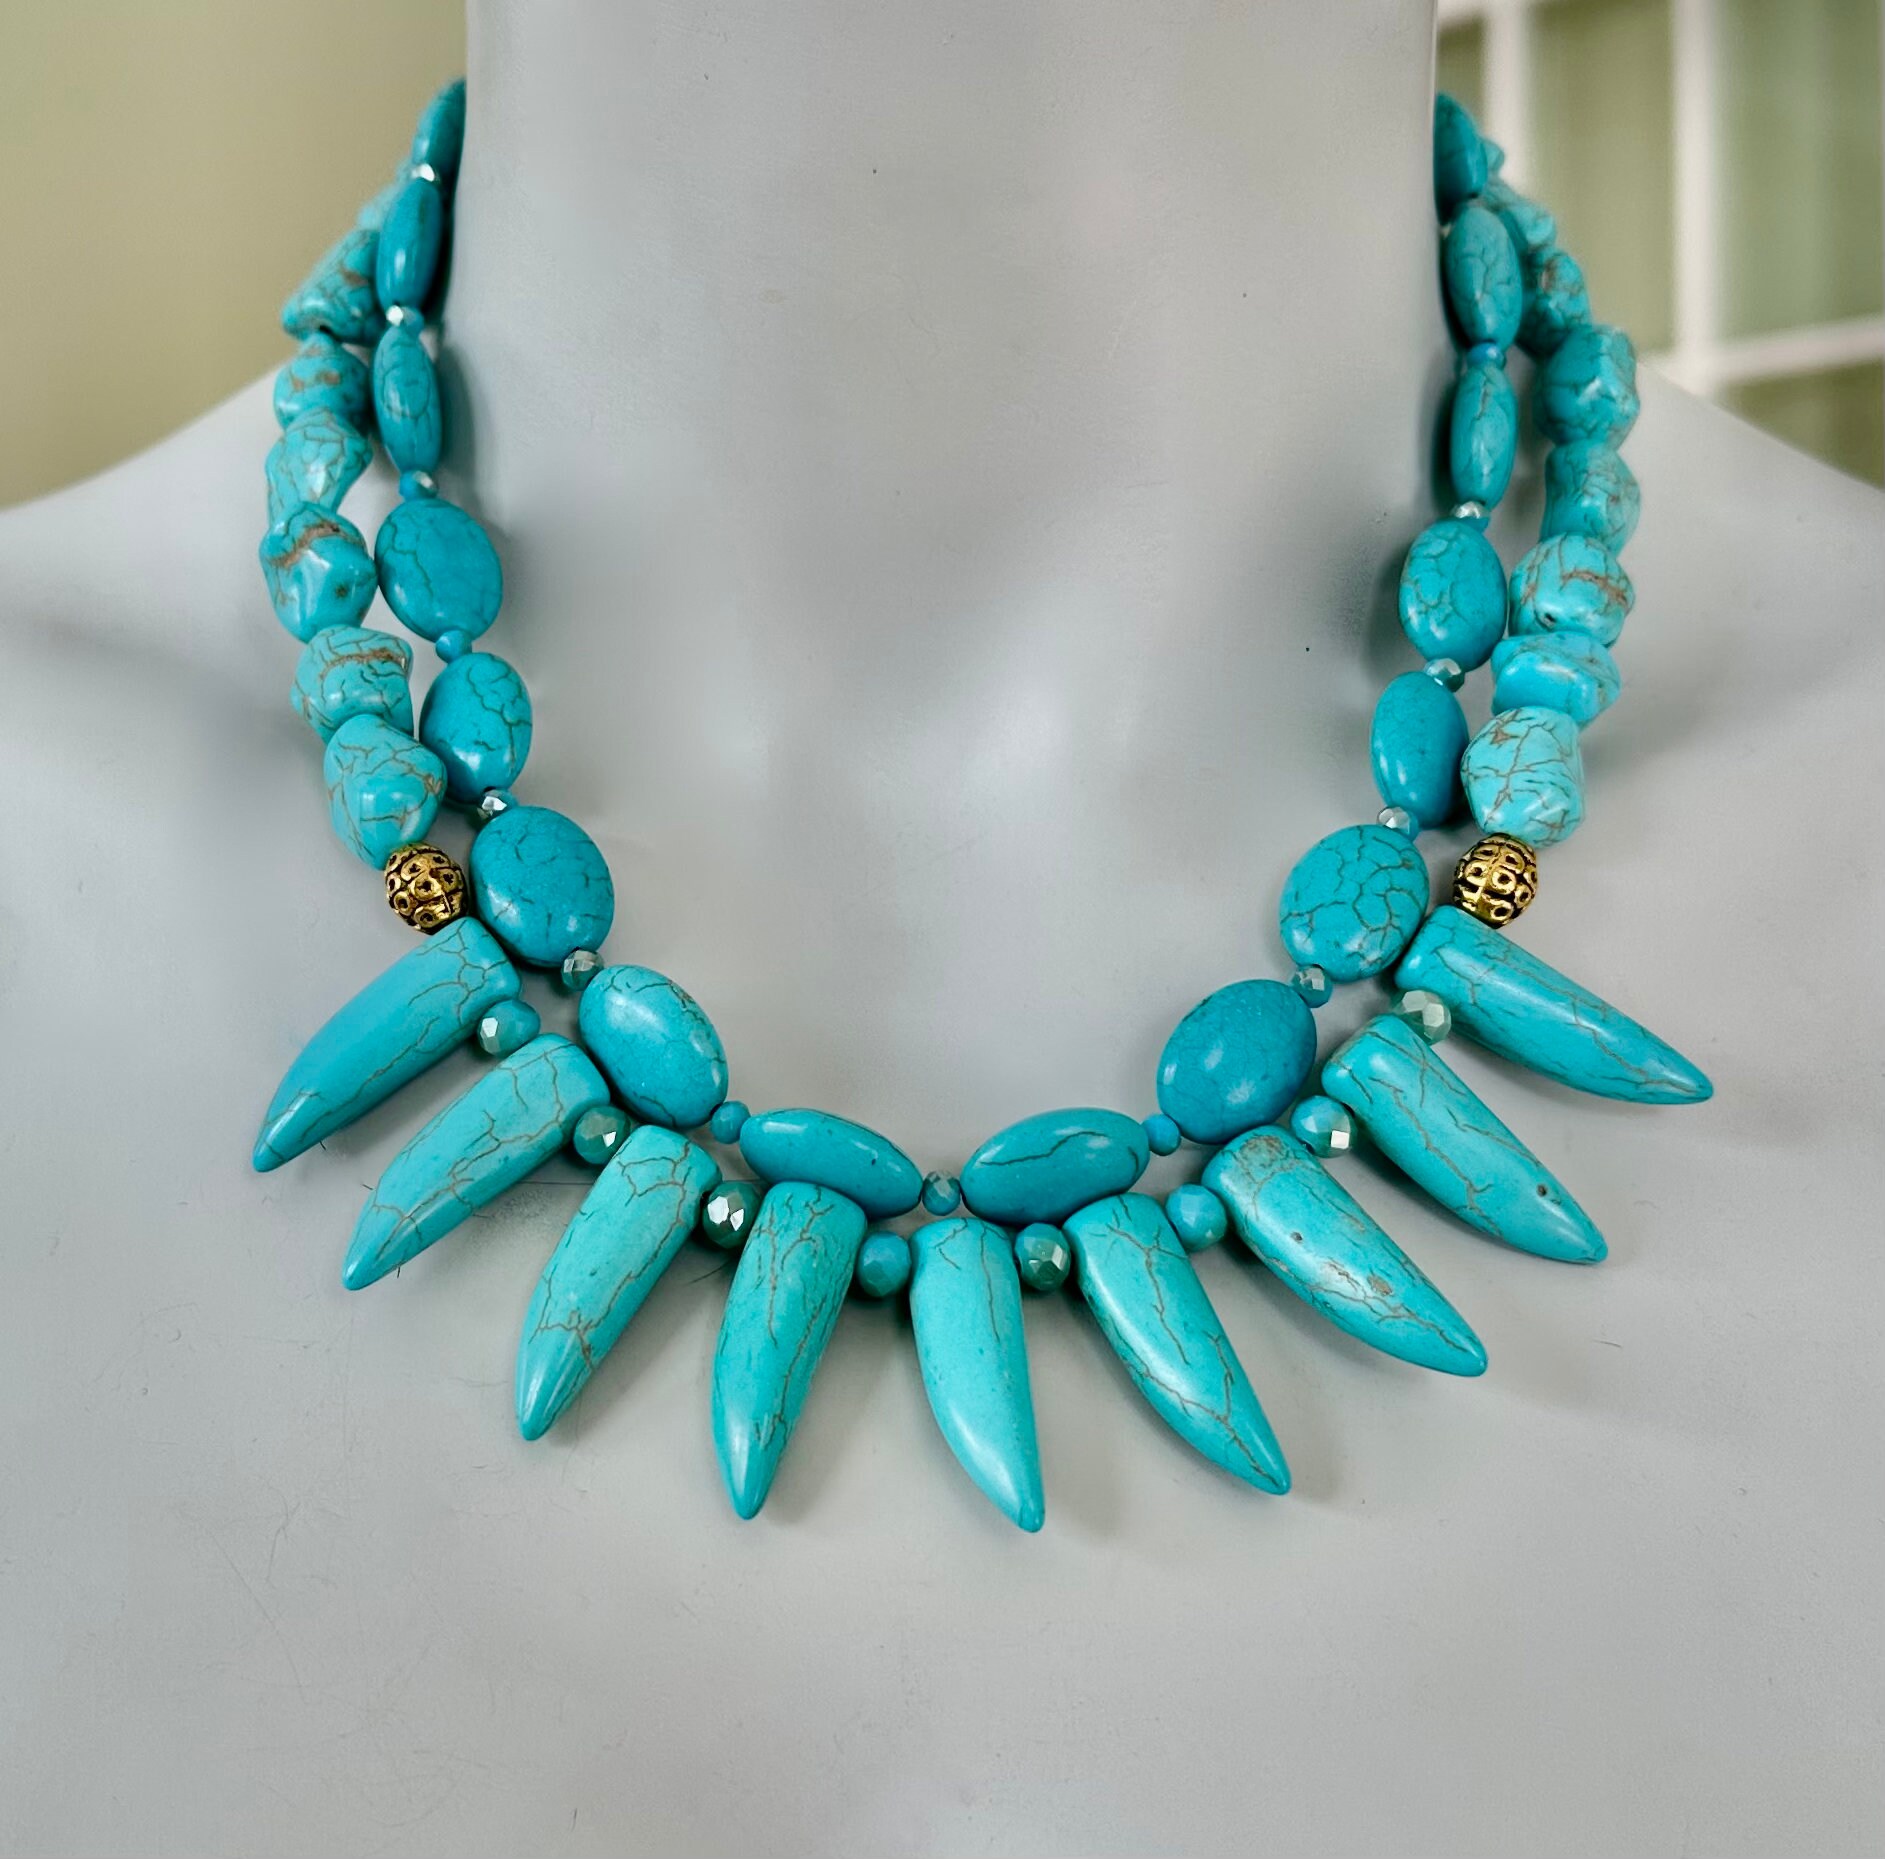 Wavy Turquoise Statement Necklace